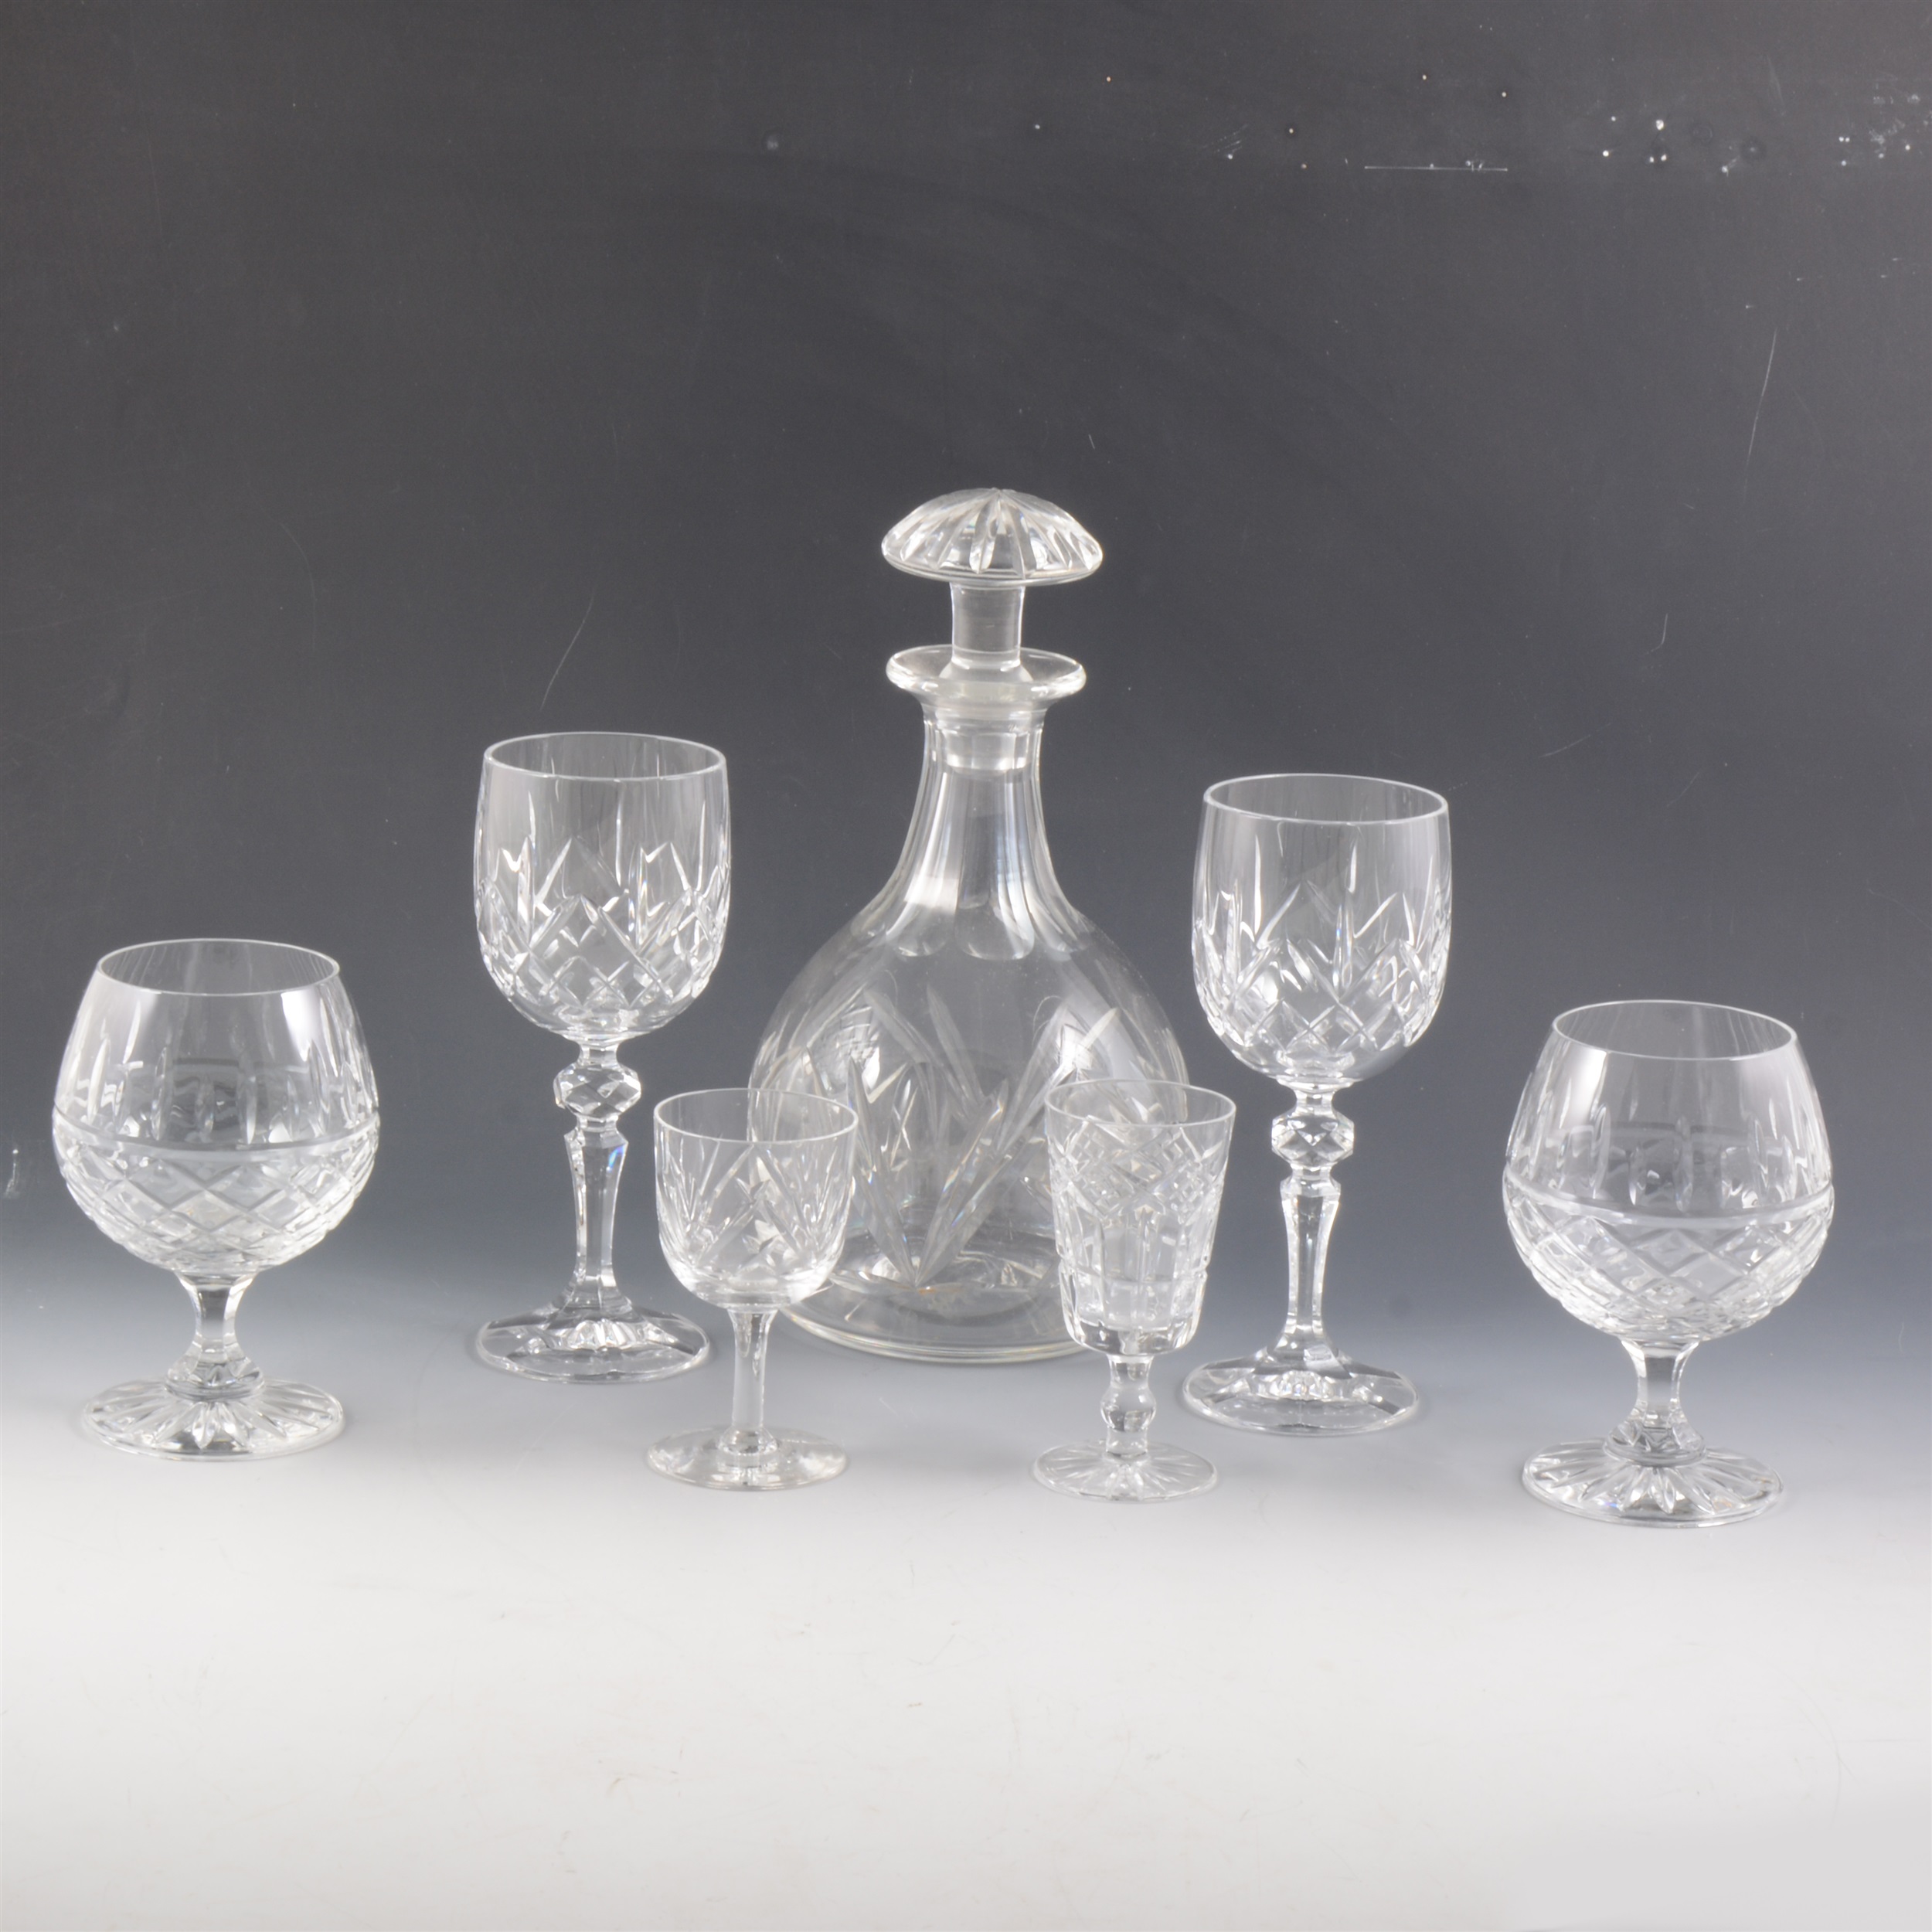 Pair of mallet-shape cut glass decanters, and other glassware